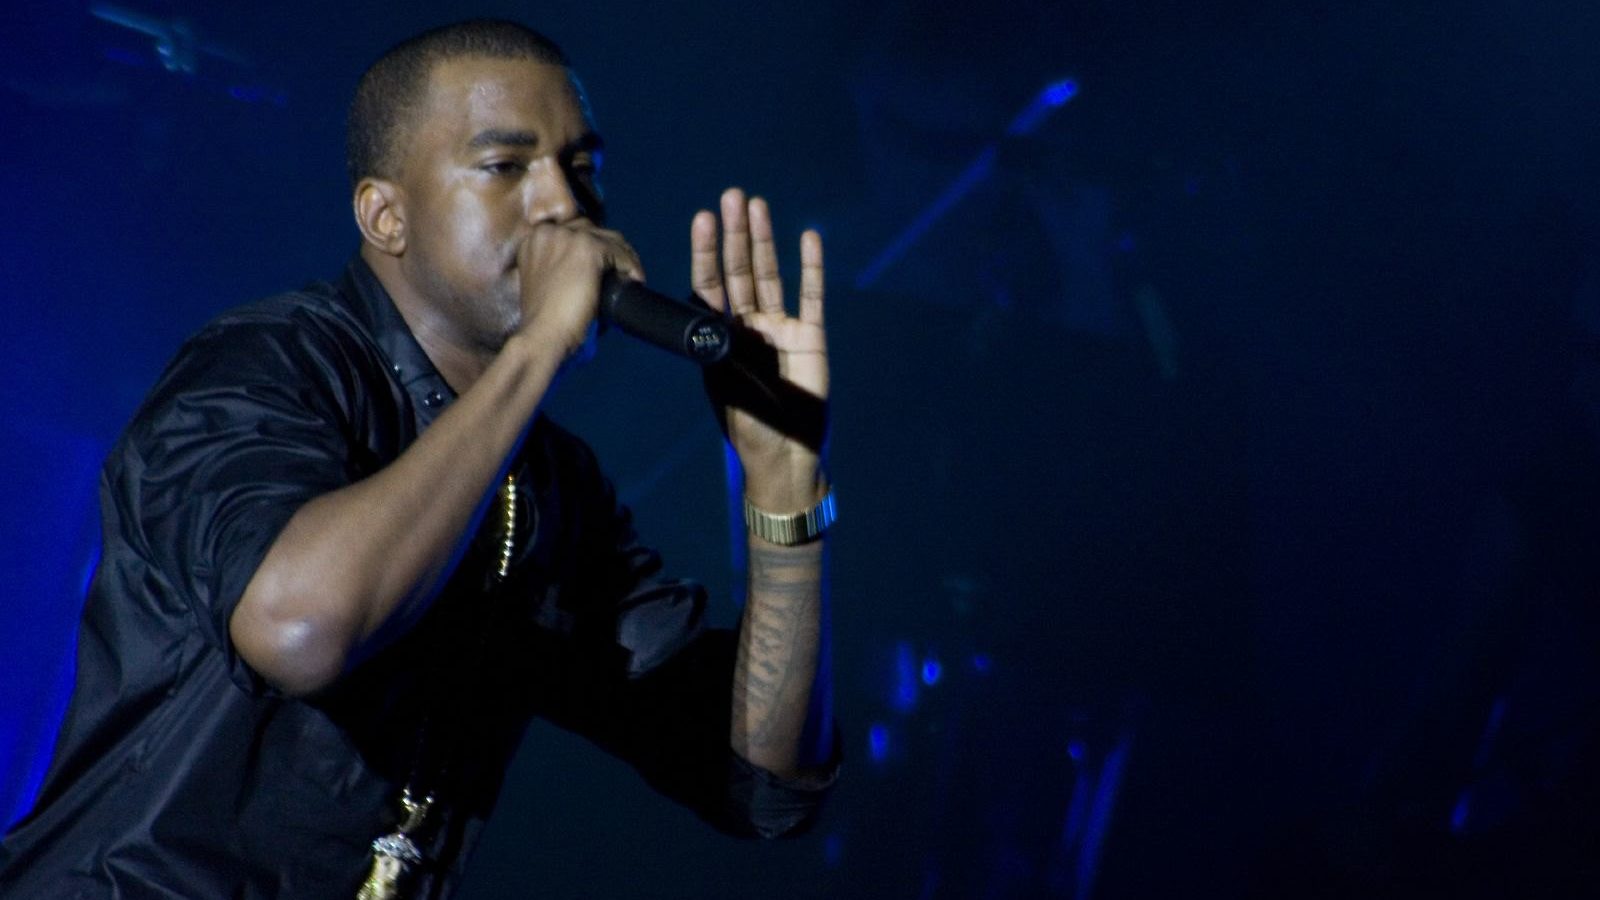 Kanye West at Forefront of Antisemitism in 2022, Jewish Rights Group Says